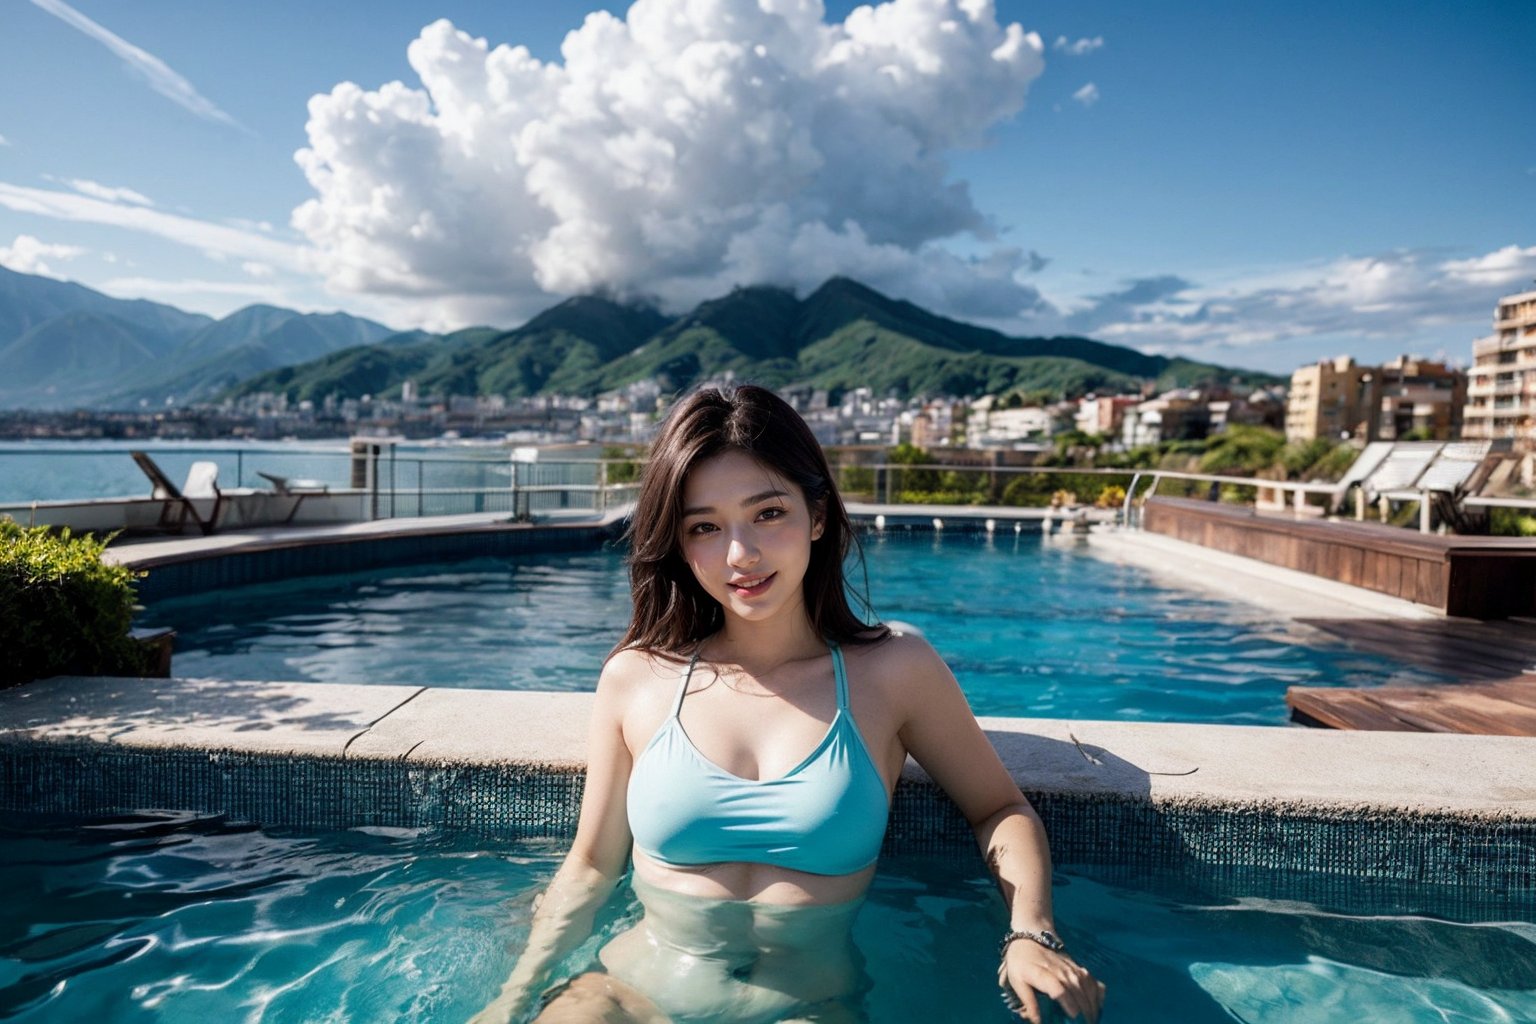 The image has a contemporary photographic art style. It showcases a woman in a pool on a rooftop, with a focus on her figure, smiling towards the camera. The composition features the woman as the main subject at the center of the frame, with her upper body emerging from the water. The background features a coastal cityscape with buildings, industrial structures, and distant mountains under a cloudy sky. The pool's edge is adorned with decorative stones, enhancing the serene and leisurely atmosphere of the scene.